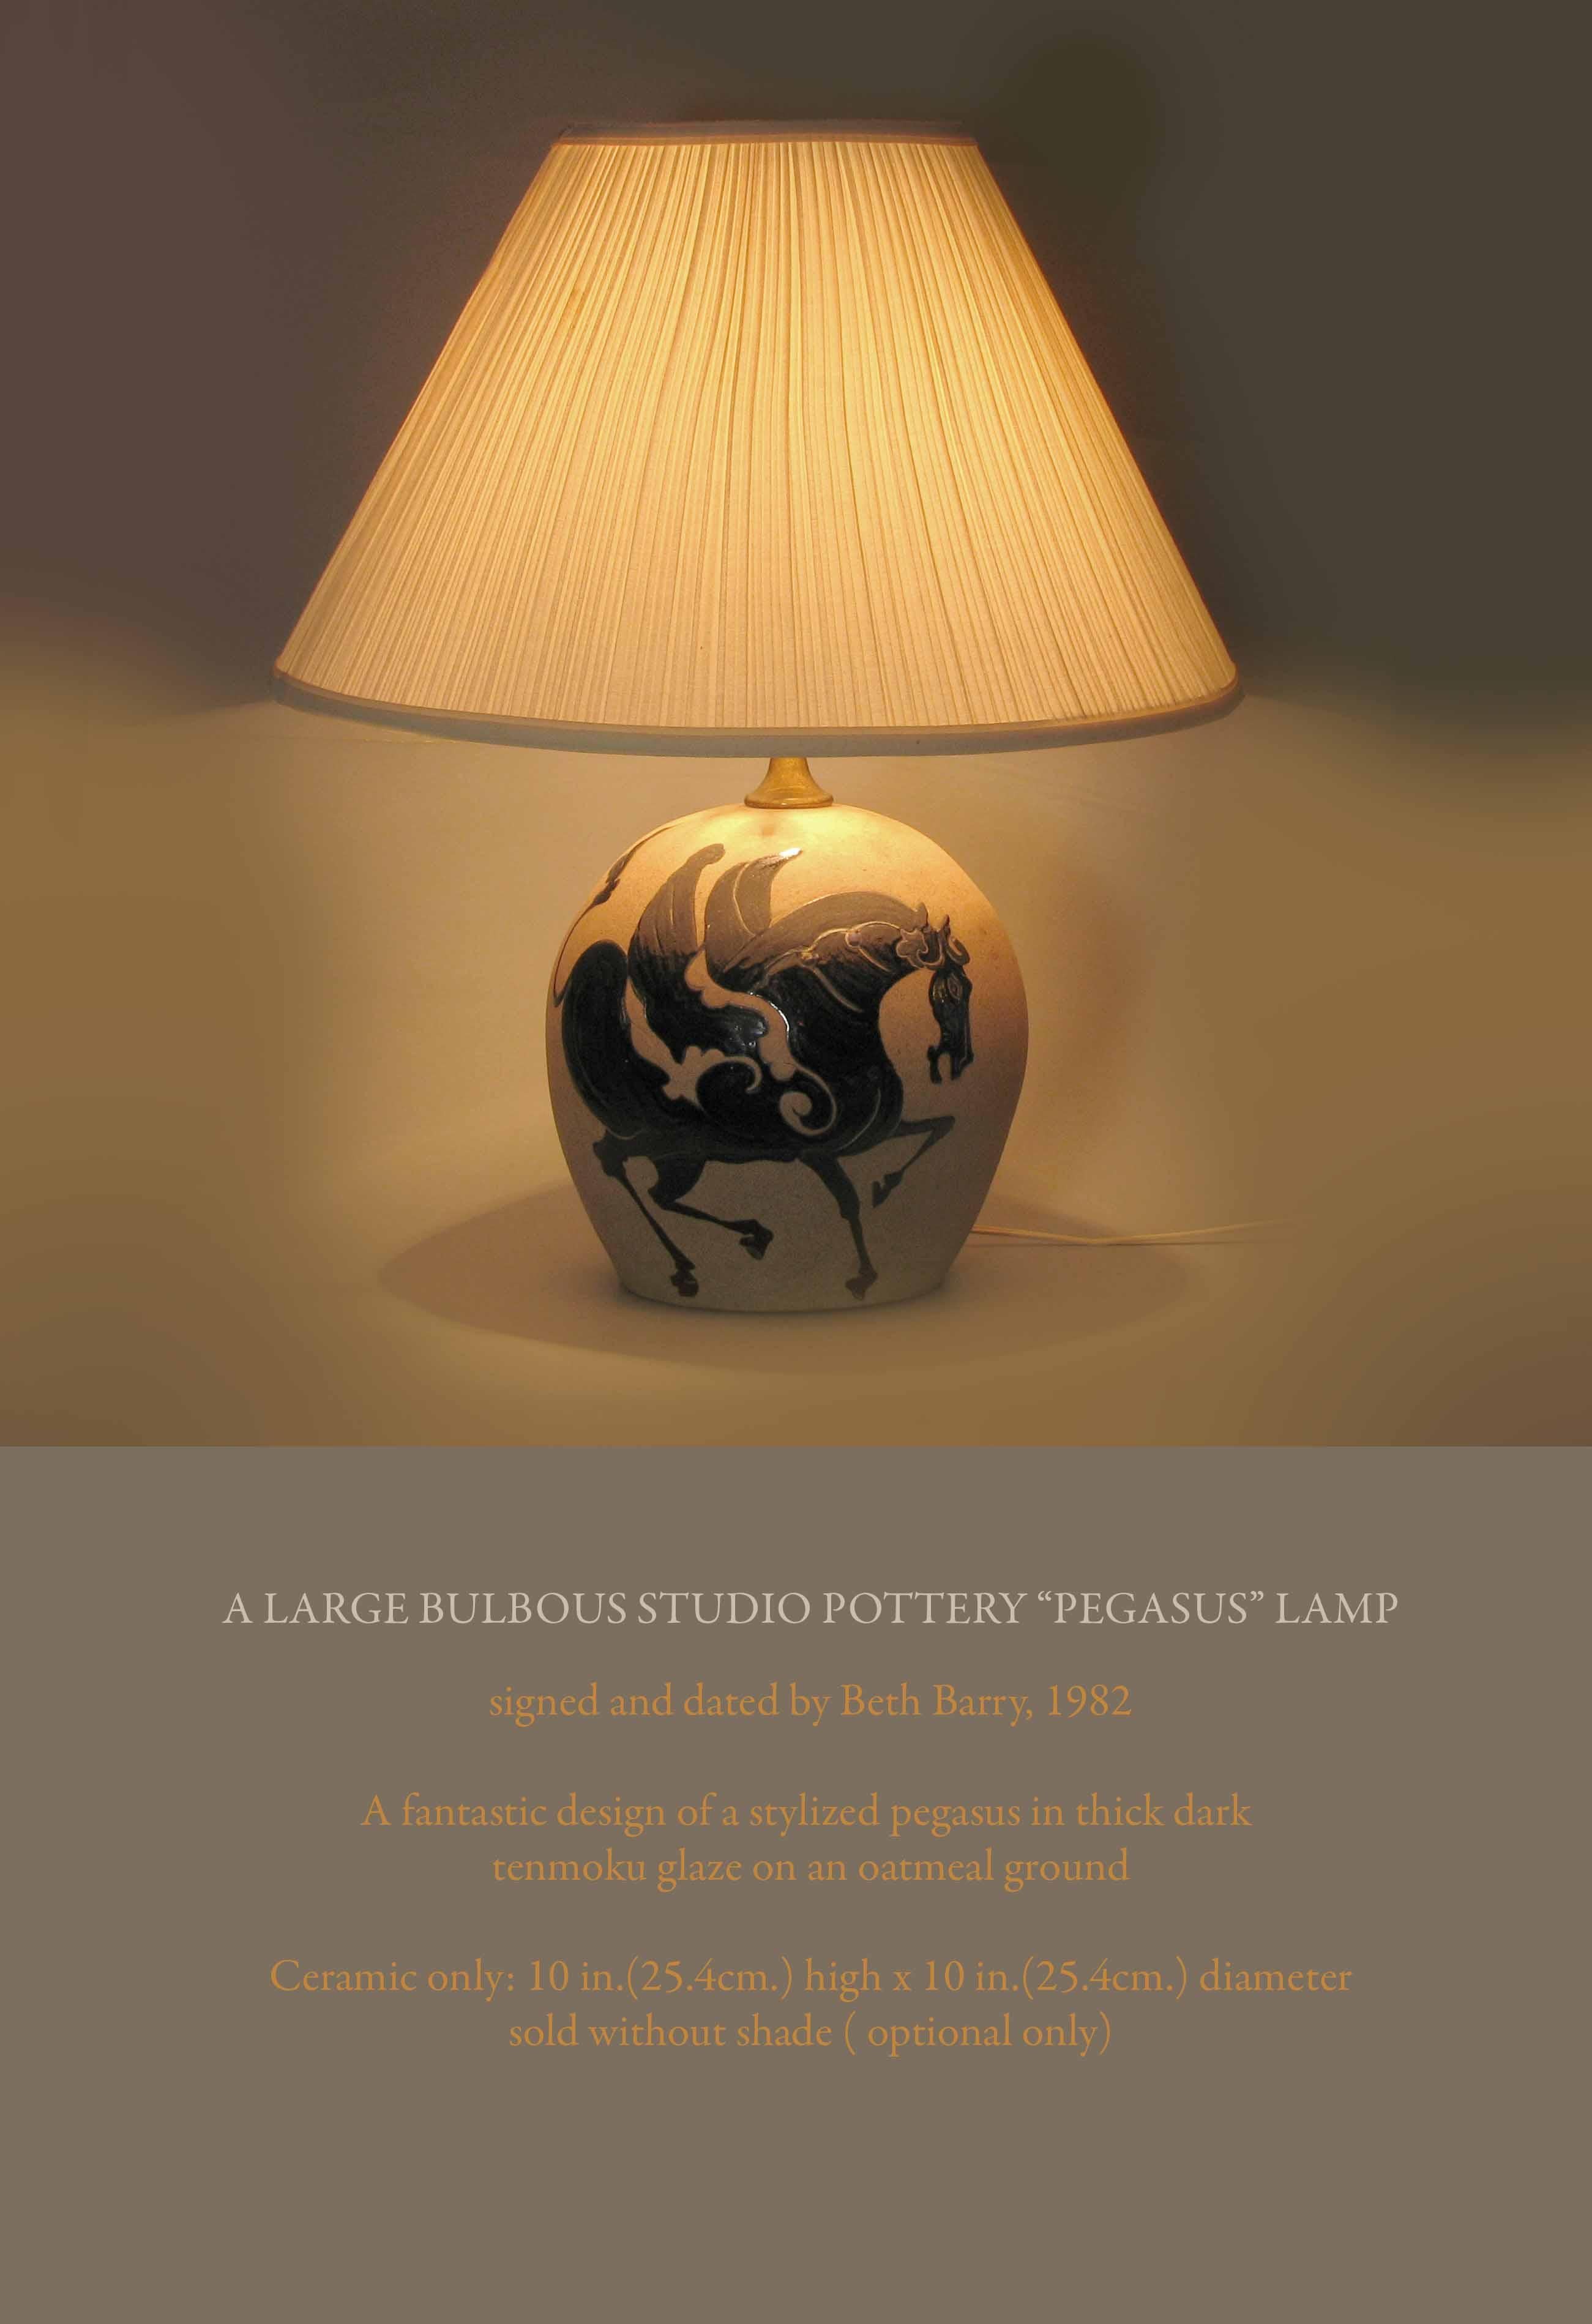 Hand-Crafted A Large Bulbous Studio Pottery “PEGASUS” Lamp For Sale